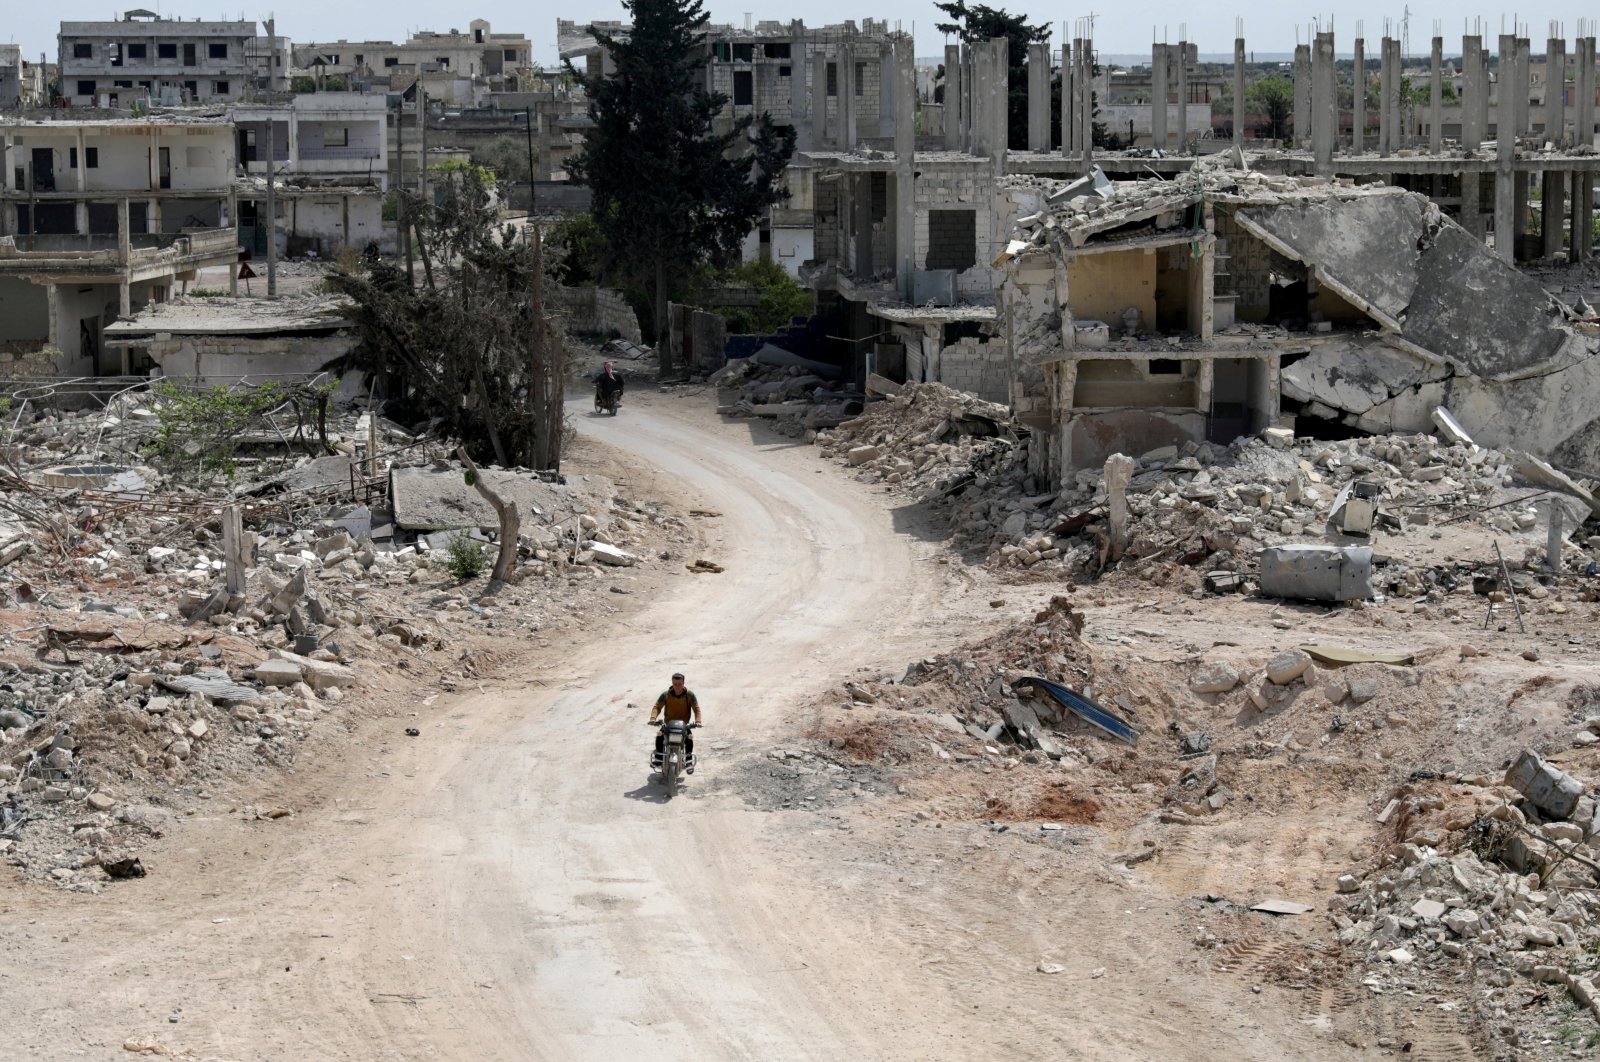 A man rides a motorbike past damaged buildings in the opposition-held town of Nairab, Idlib region, Syria, April 17, 2020. (Reuters Photo)